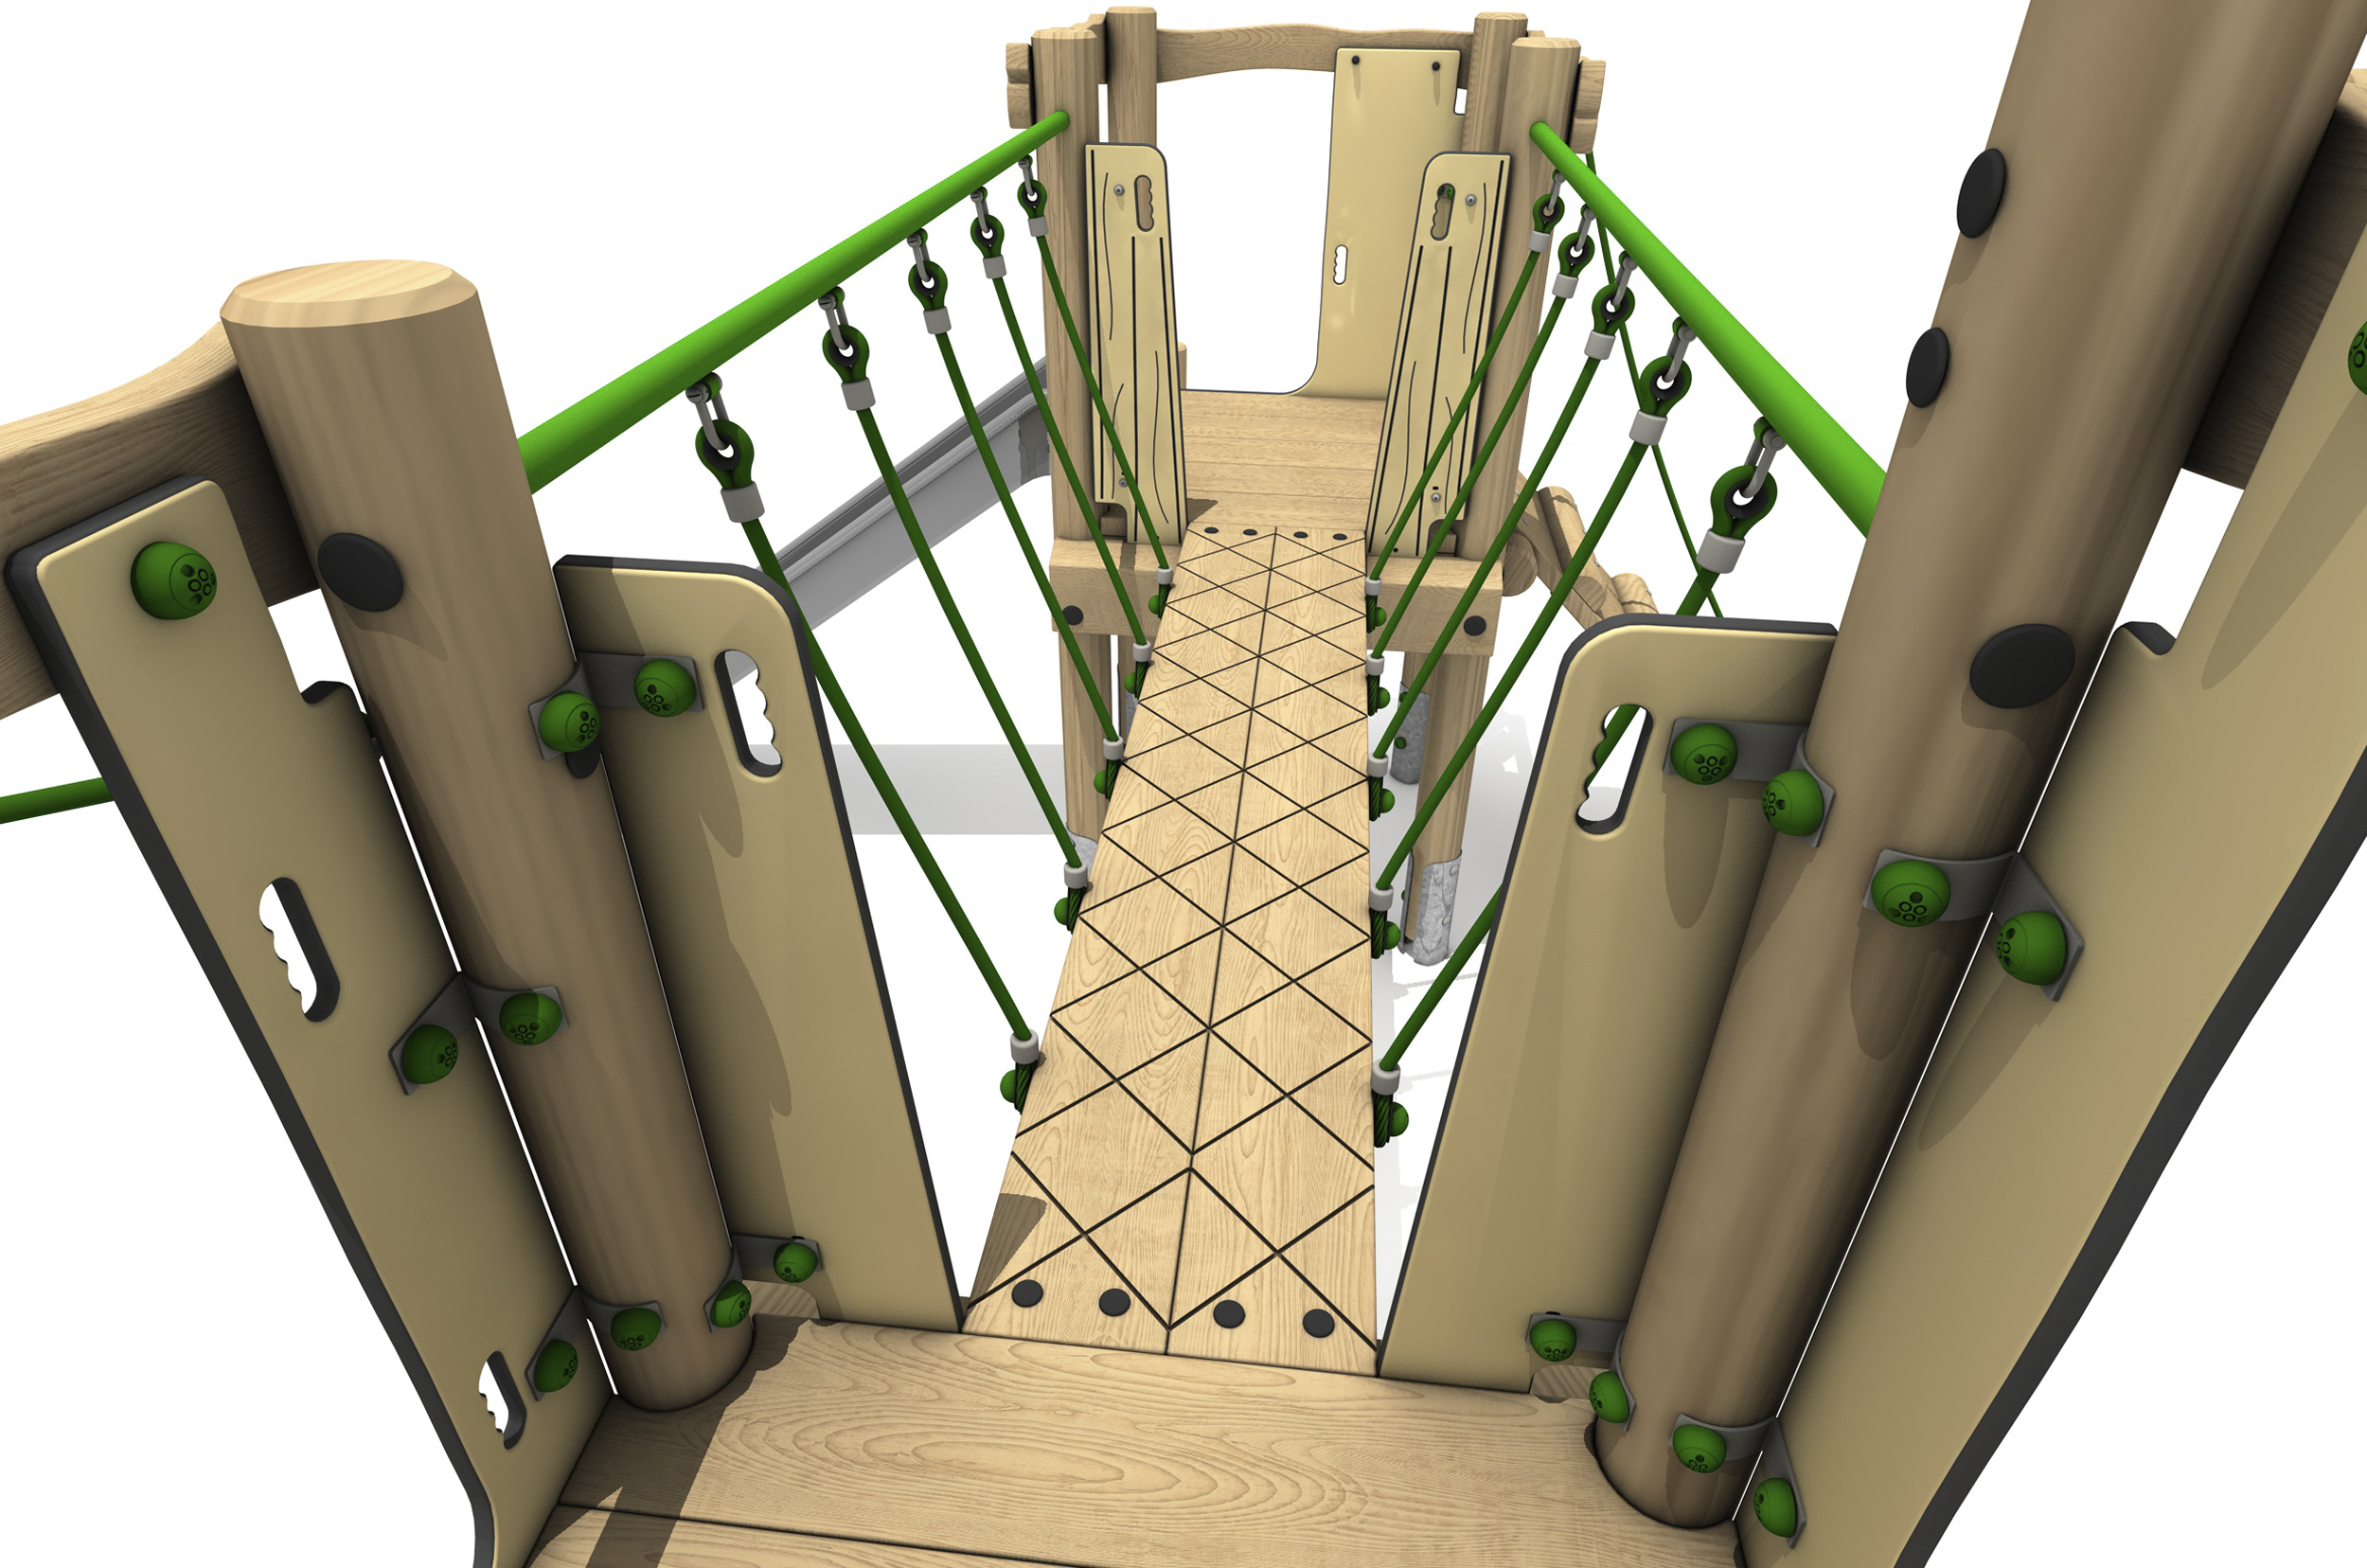 Timber Tower Double Deck 02, A timber tower climber platform where children access the steel slide. the platforms are linked by a central bridge with vertical green ropes and green steel hand rails.